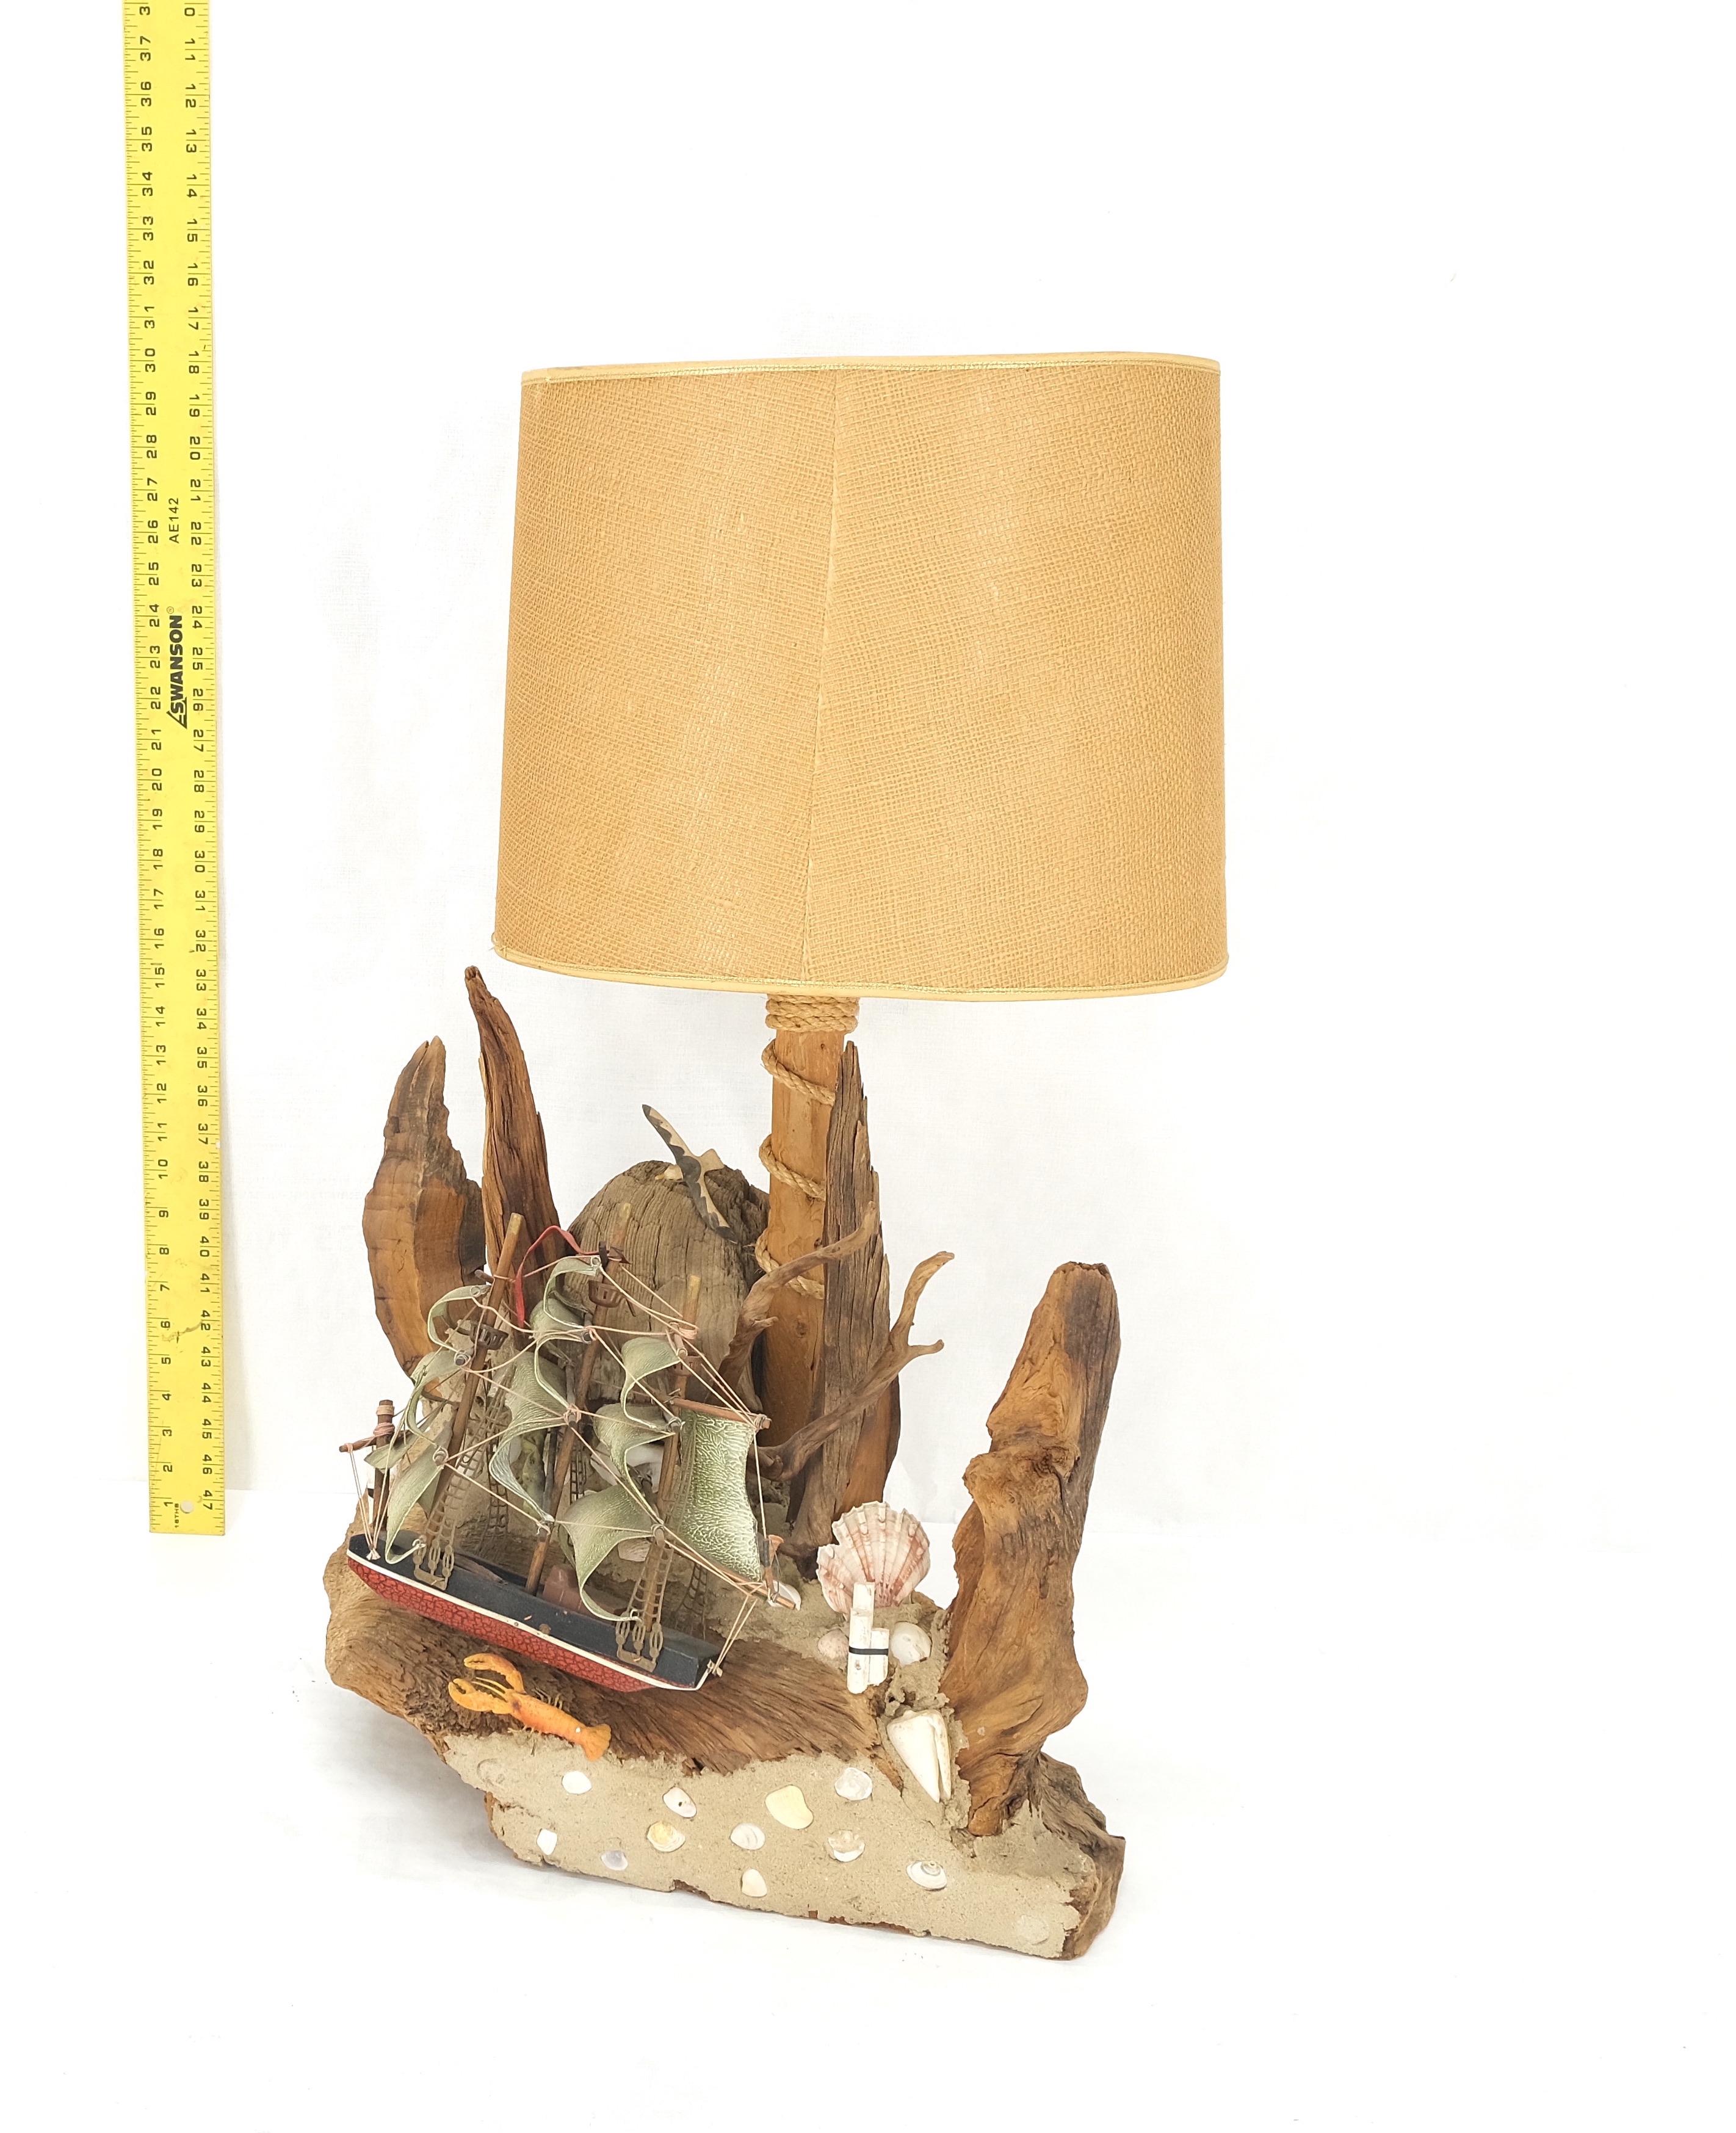 Sea Naval Shells Theme Decorated Driftwood Base Table Lamp Mid Century Modern MINT!